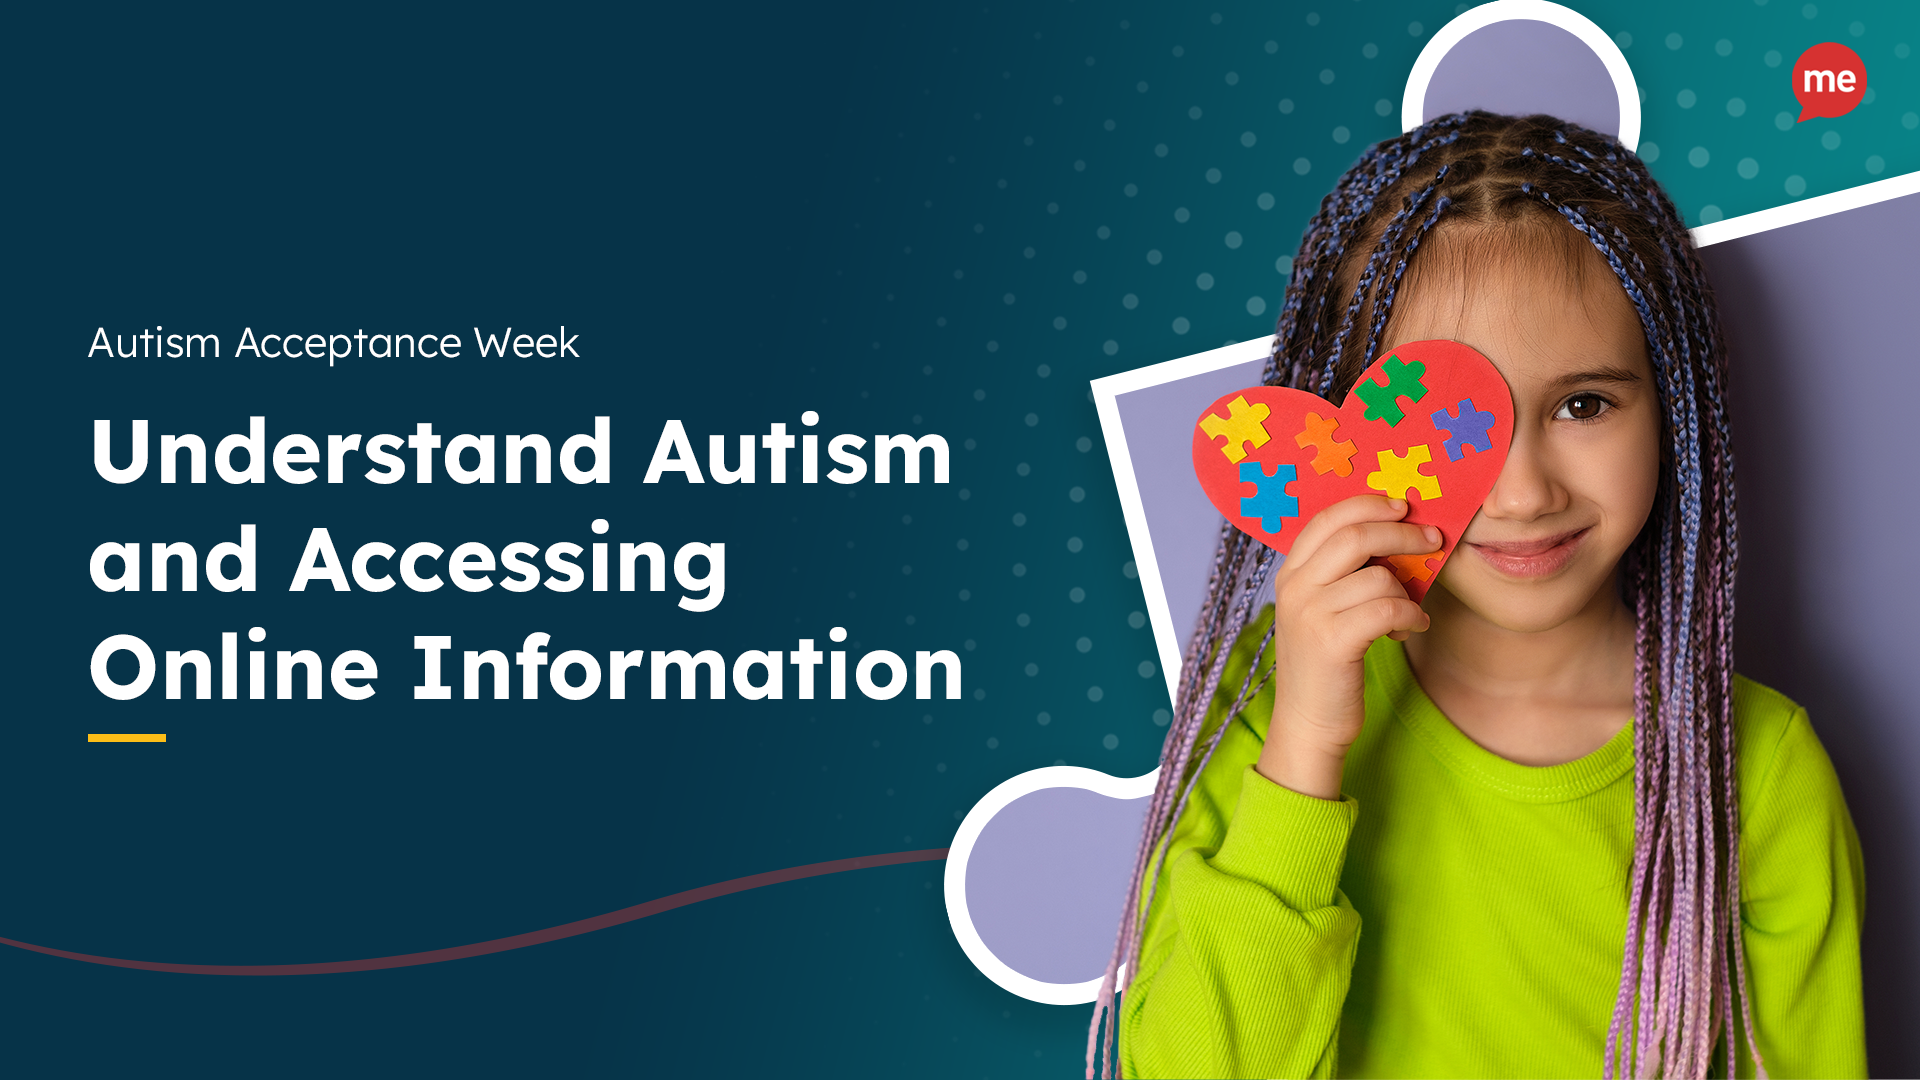 A graphic of a little girl in front of a jigsaw piece holding up a heart. The text says "Understanding Autism and Accessing Online Information".